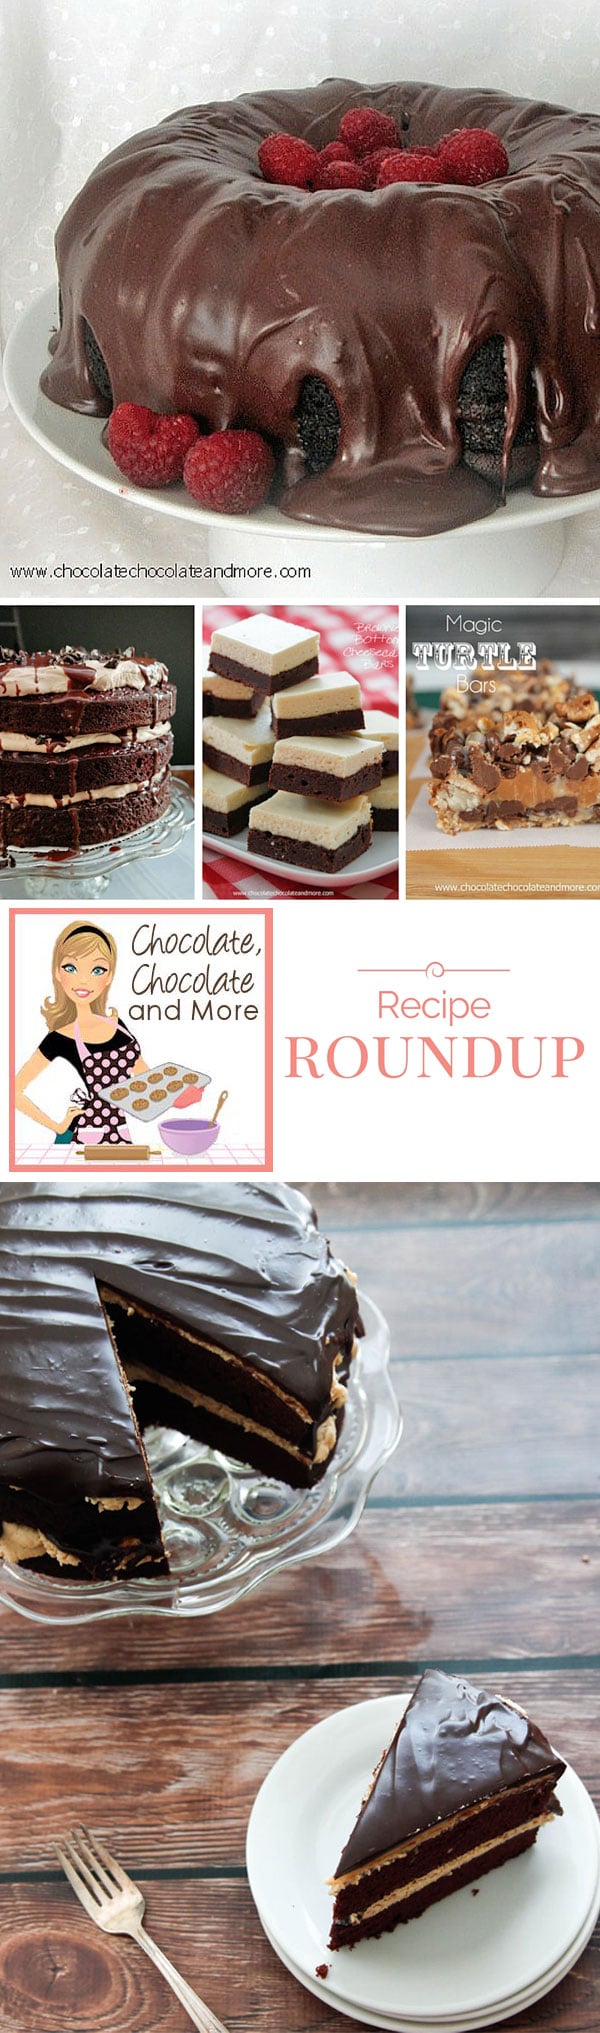 Collage of Chocolate Chocolate and More Recipe Roundup and Tribute